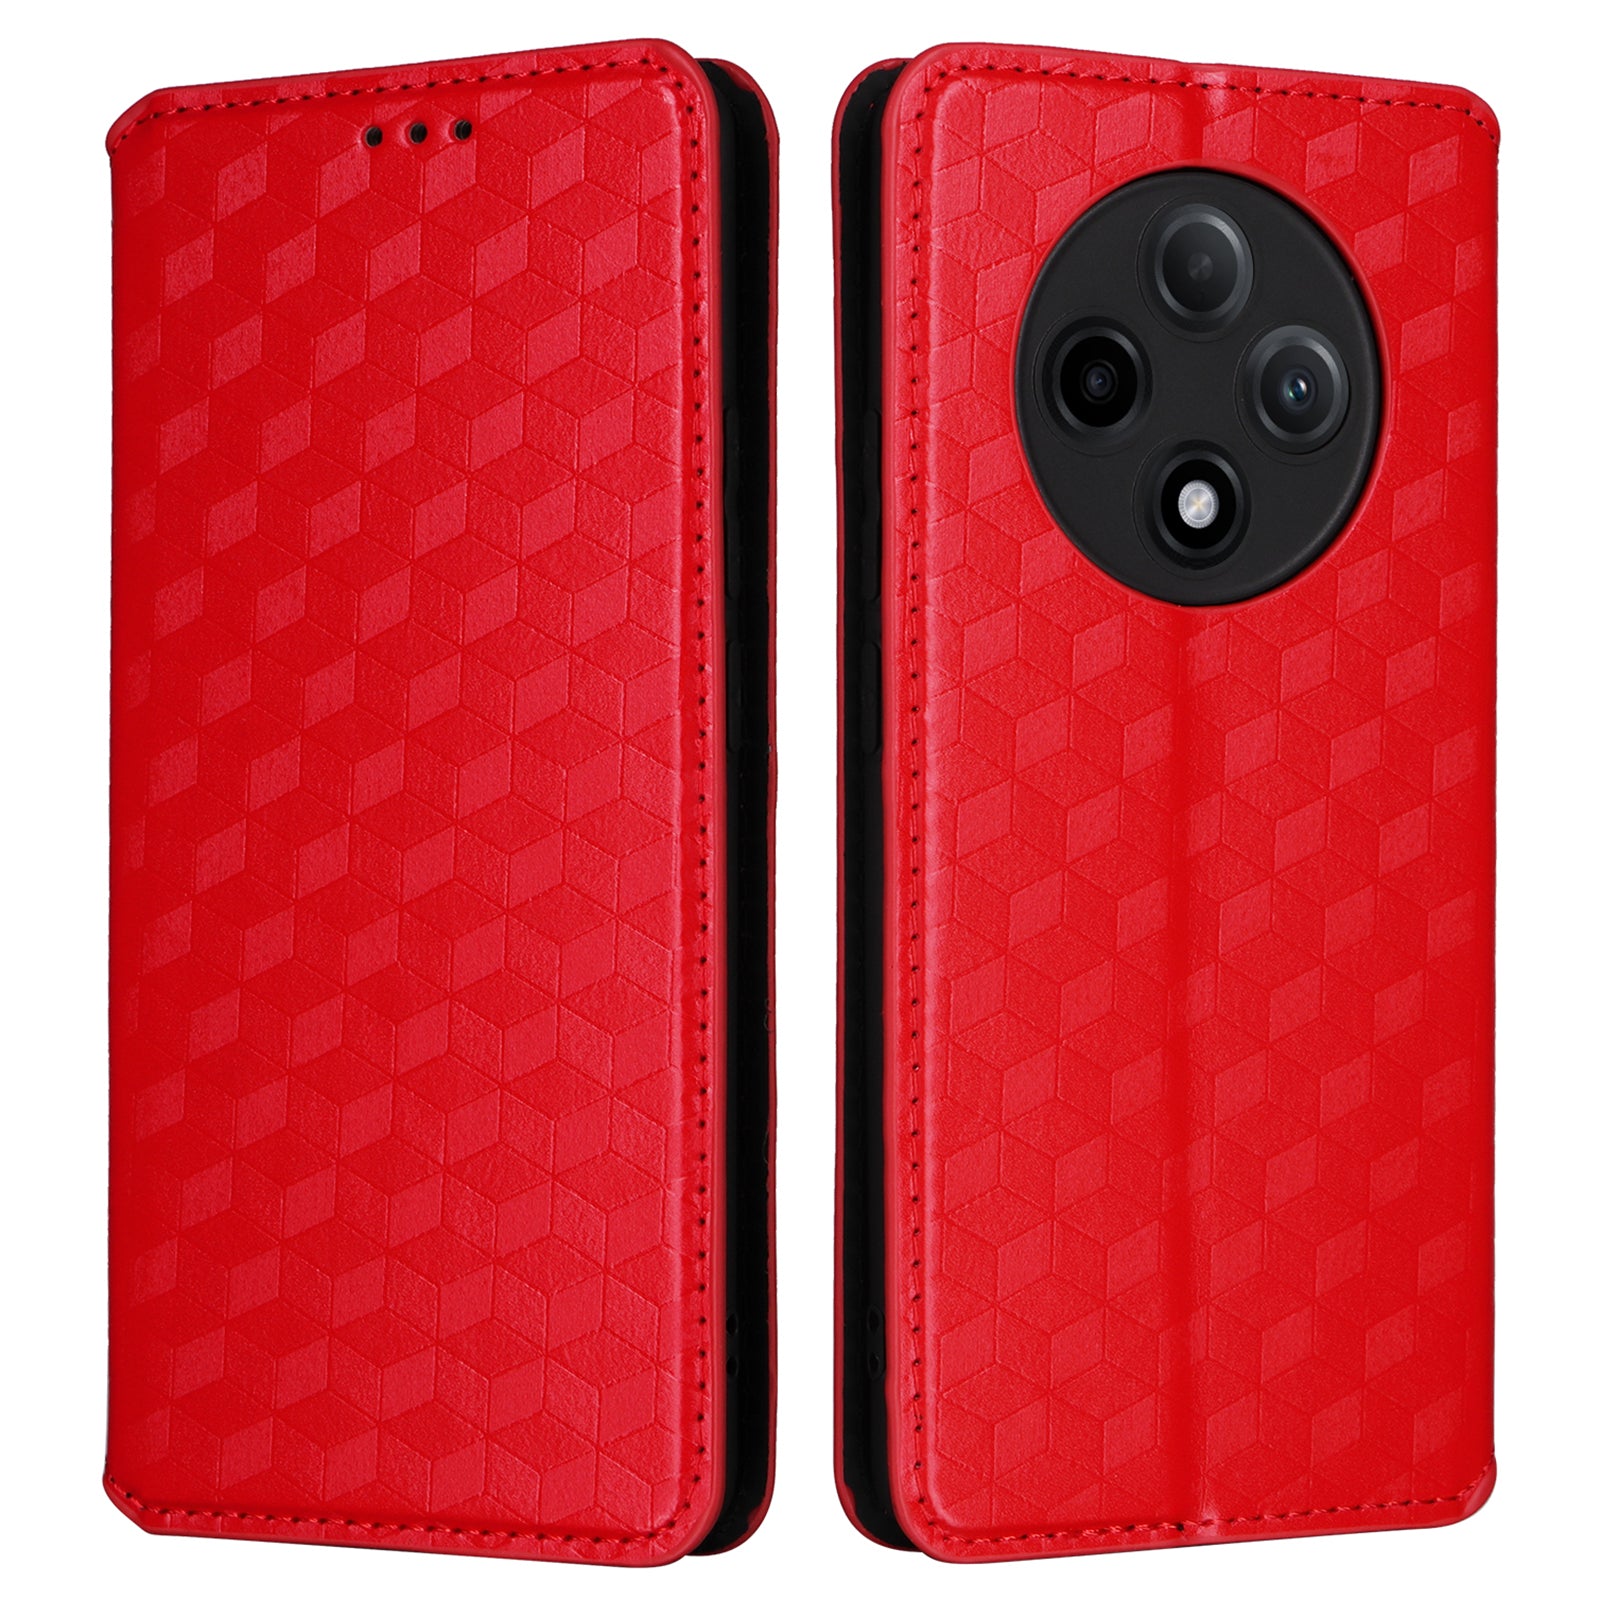 For Oppo A3 Pro 5G Leather Wallet Flip Cover Mobile Phone Case Wholesale - Red